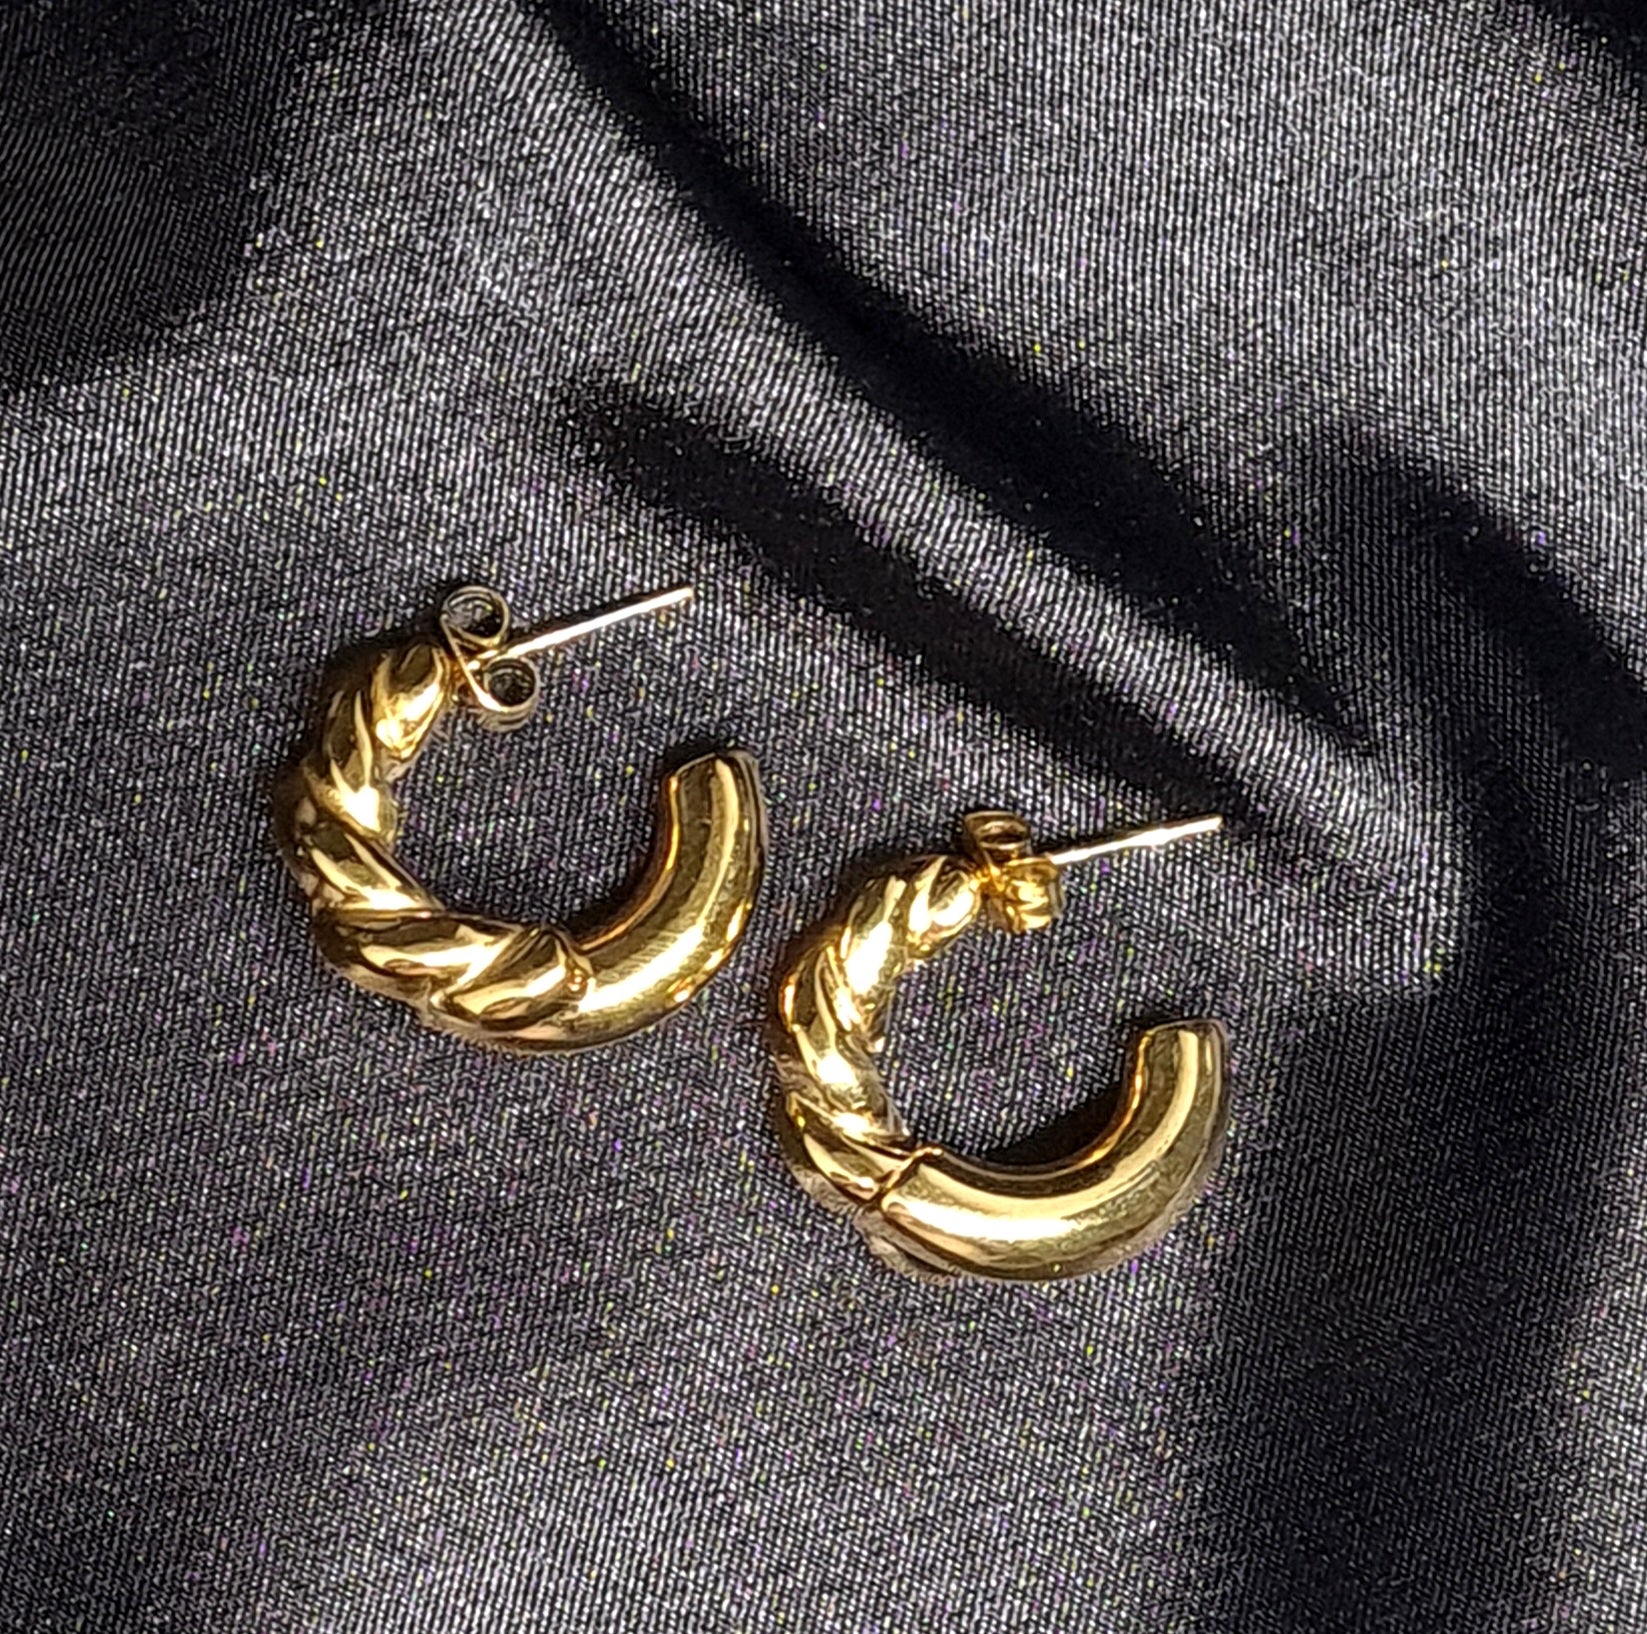 Gold hoop earrings sitting on black cloth. The earrings are a classic and elegant style that would be perfect for any occasion. The earrings are made of gold and have a hoop design. The hoops are large and round, and they sit on a black cloth.